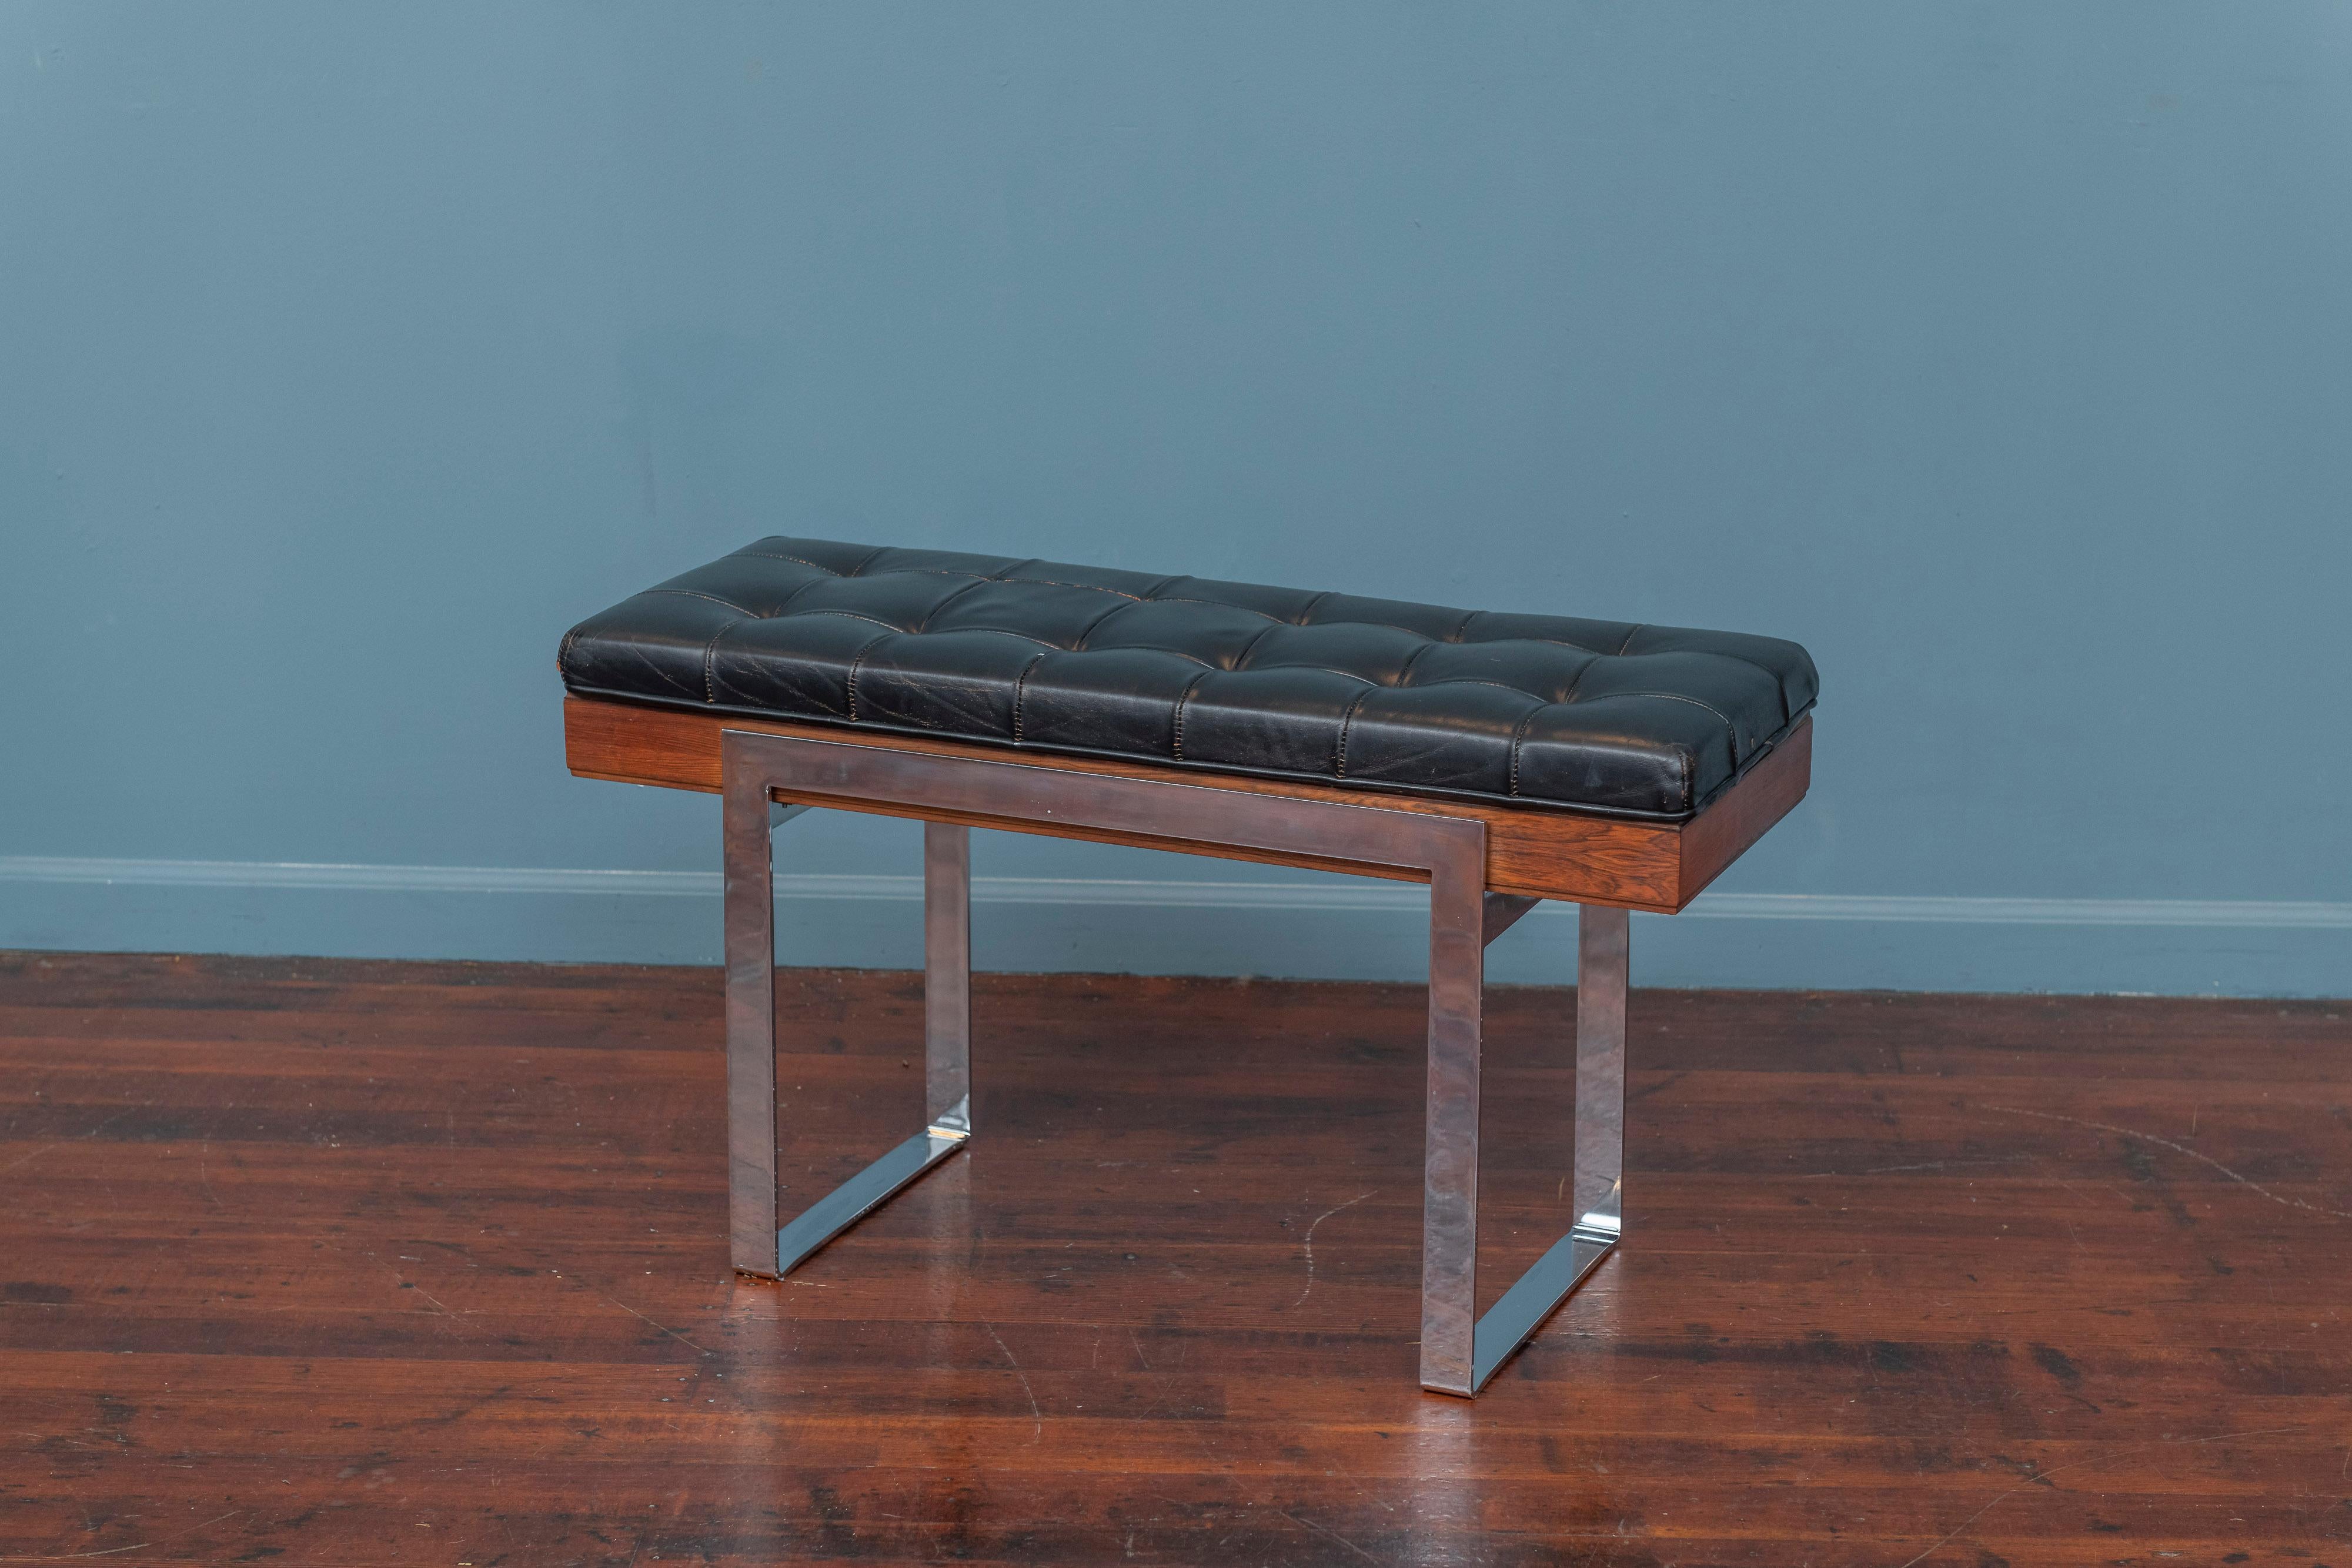 Mid-Century modern piano bench or entry way stool by Kimball Manufacturing co. Executed in a black tufted leather seat on a rosewood box frame and supported by solid chrome plated steel legs. Made from high quality materials and construction this